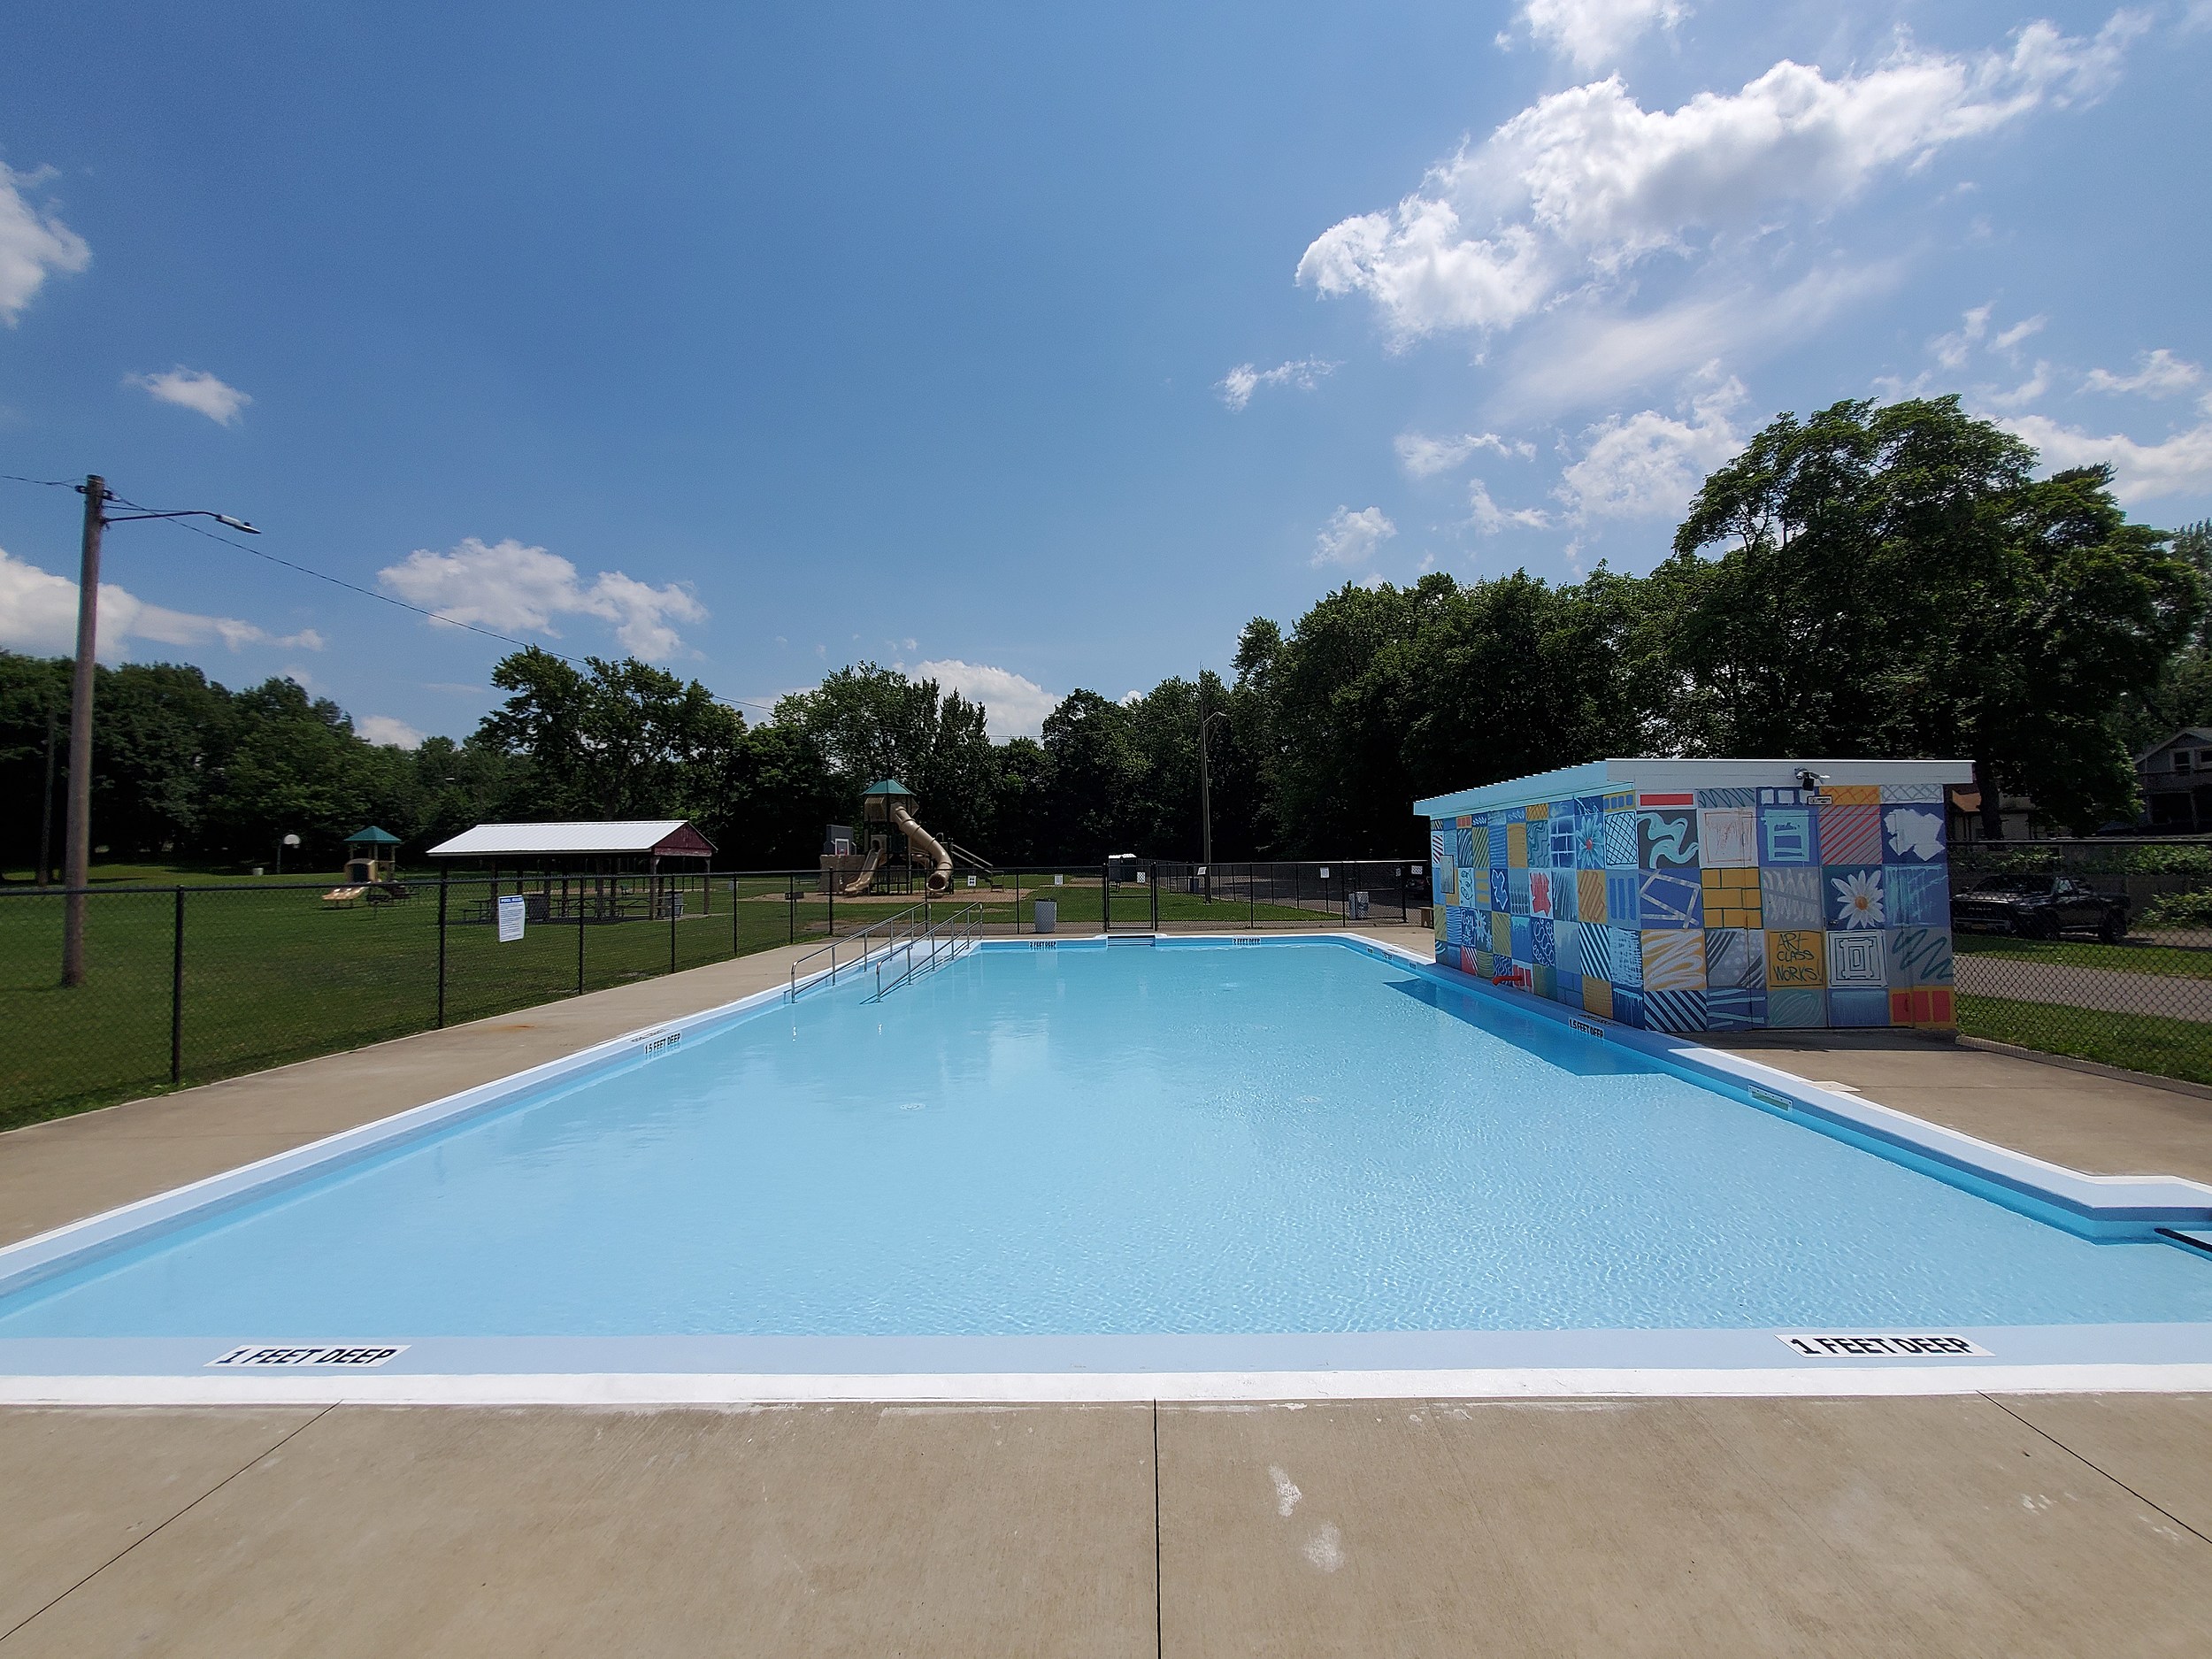 Vestal Constructing New Pool With StateOfTheArt Spray Park